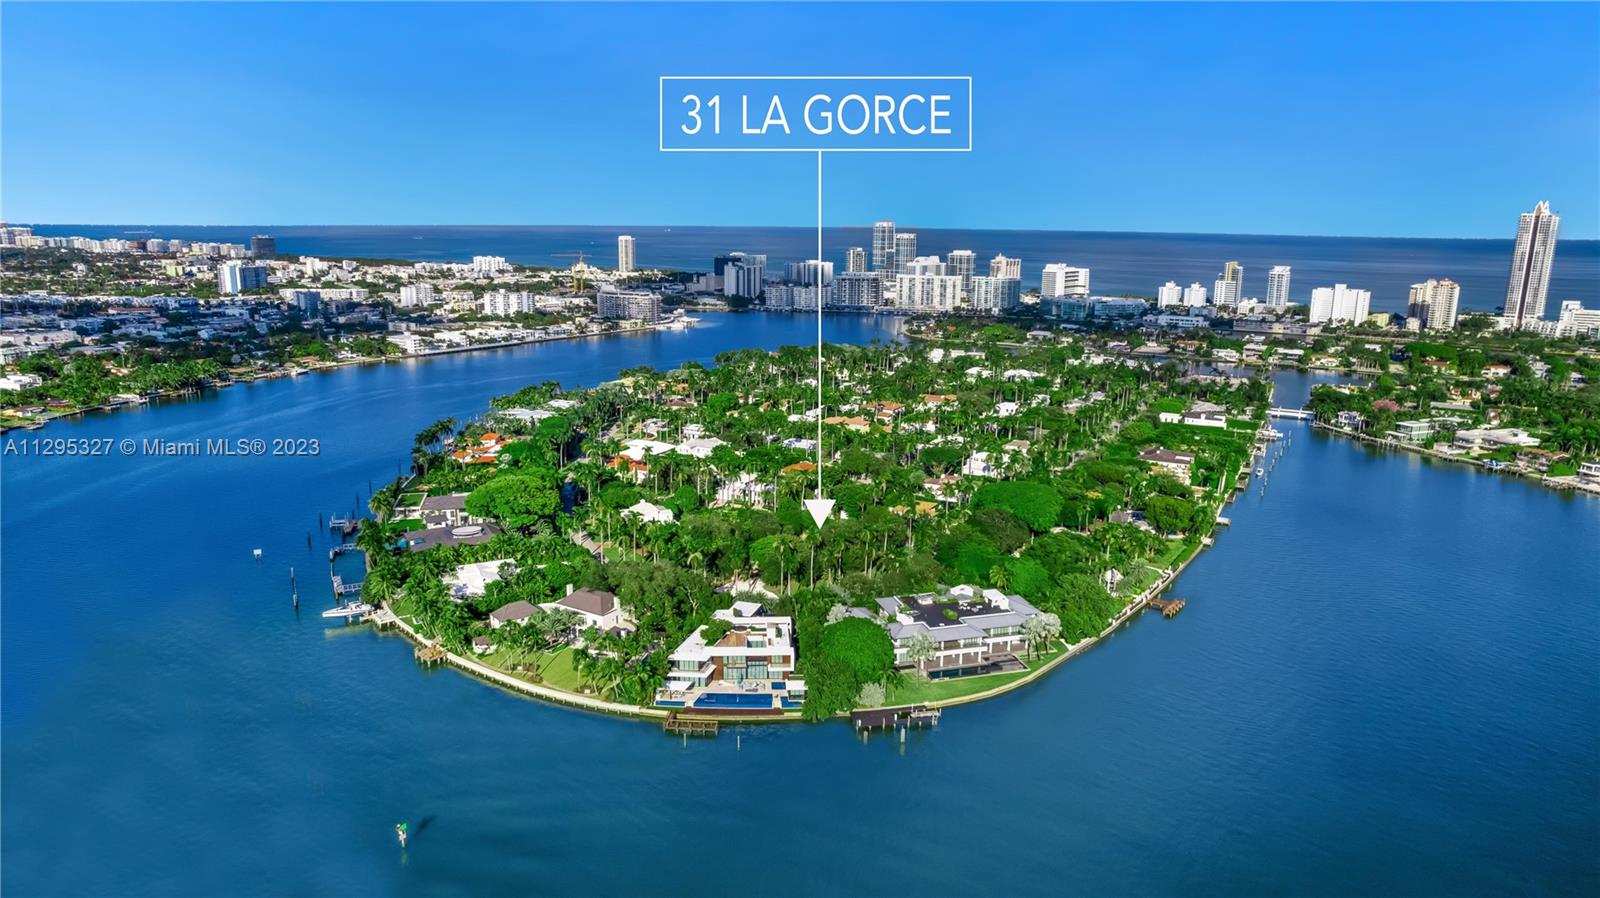 Build your dream mansion on this corner, 25,896-SF lot located on sought-after, La Gorce Island of Miami Beach! This is a rare opportunity to own one of the best and largest dry lots in Miami Beach, abundant with majestic oak trees! You can build over 10,000-SF home, and still have substantial land for a tremendous backyard with outdoor spaces and private amenities. La Gorce Island offers a tranquil, private setting amongst beautifully landscaped streets with swaying palm trees, 24-hour security, gated entrance, and marine patrol. It is located minutes to Indian Creek Country Club, La Gorce Country Club, Bal Harbour, South Beach, and Miami and Brickell. Lot size is as per the survey